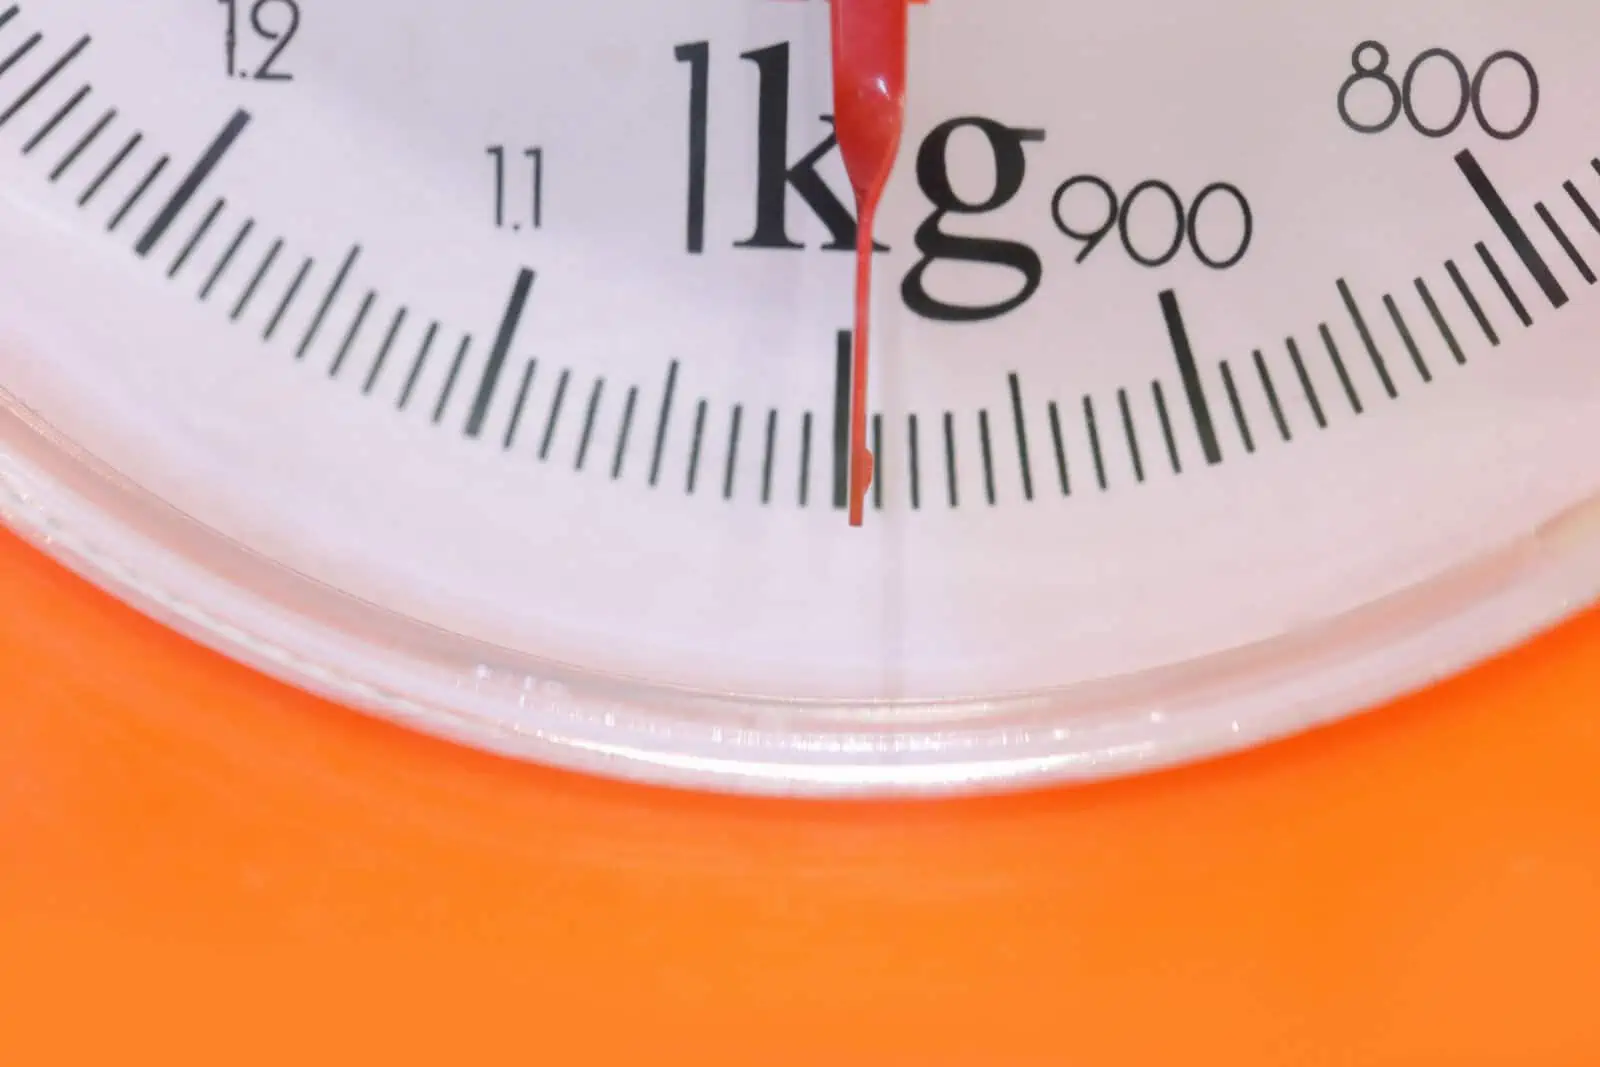 How Many Grams Are in a Kilogram?